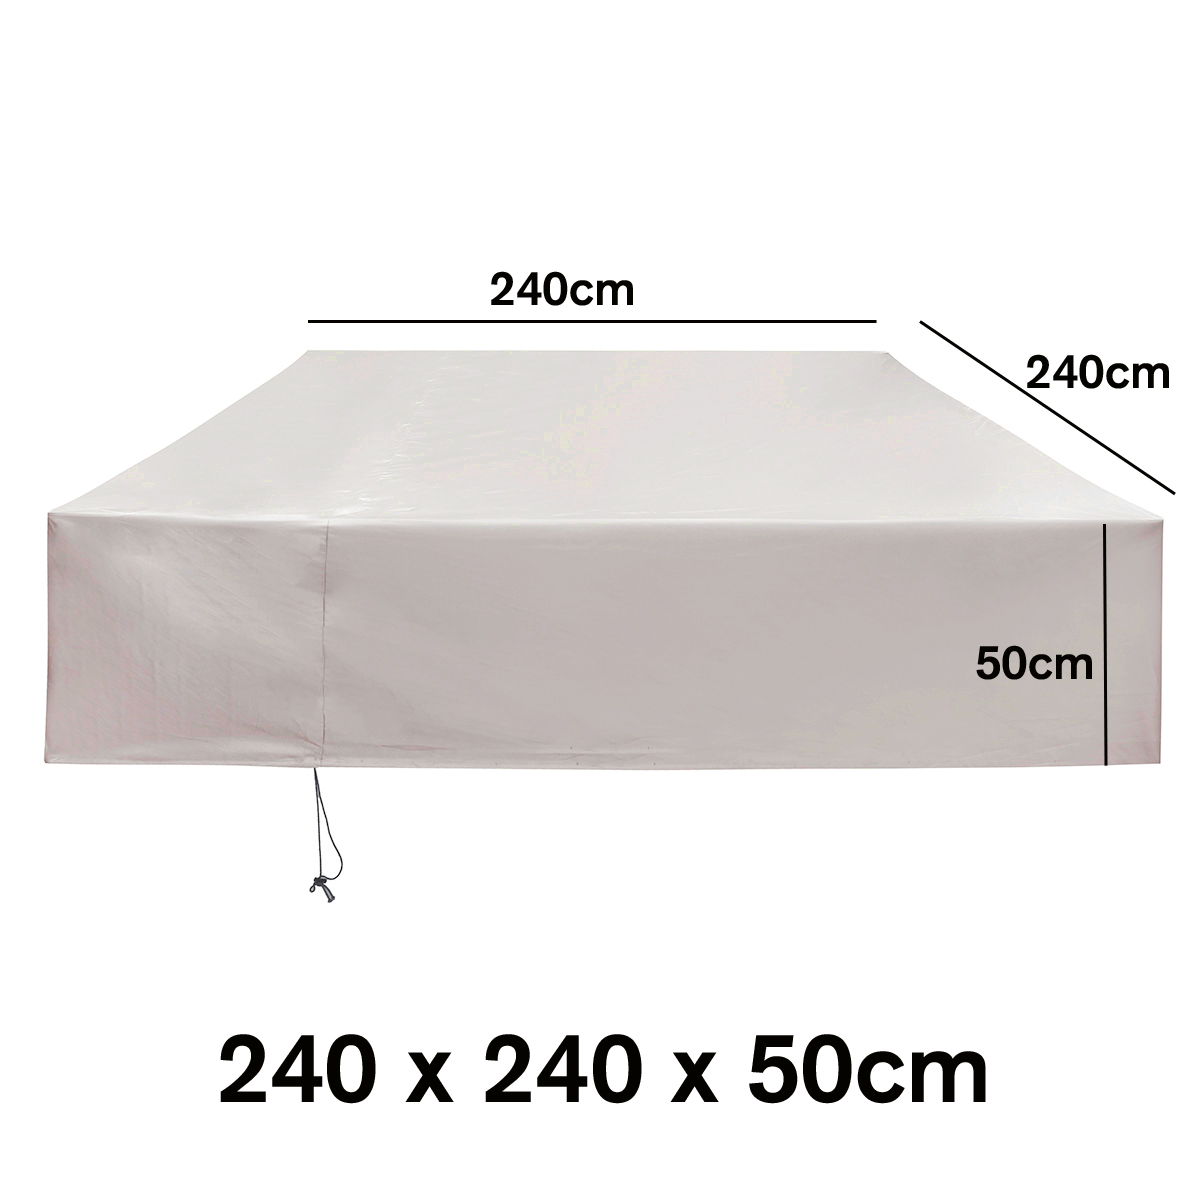 250240220CM-Outdoors-Spa-Hot-Tub-Cover-Waterproof-Furniture-Garden-Protector-1636533-8